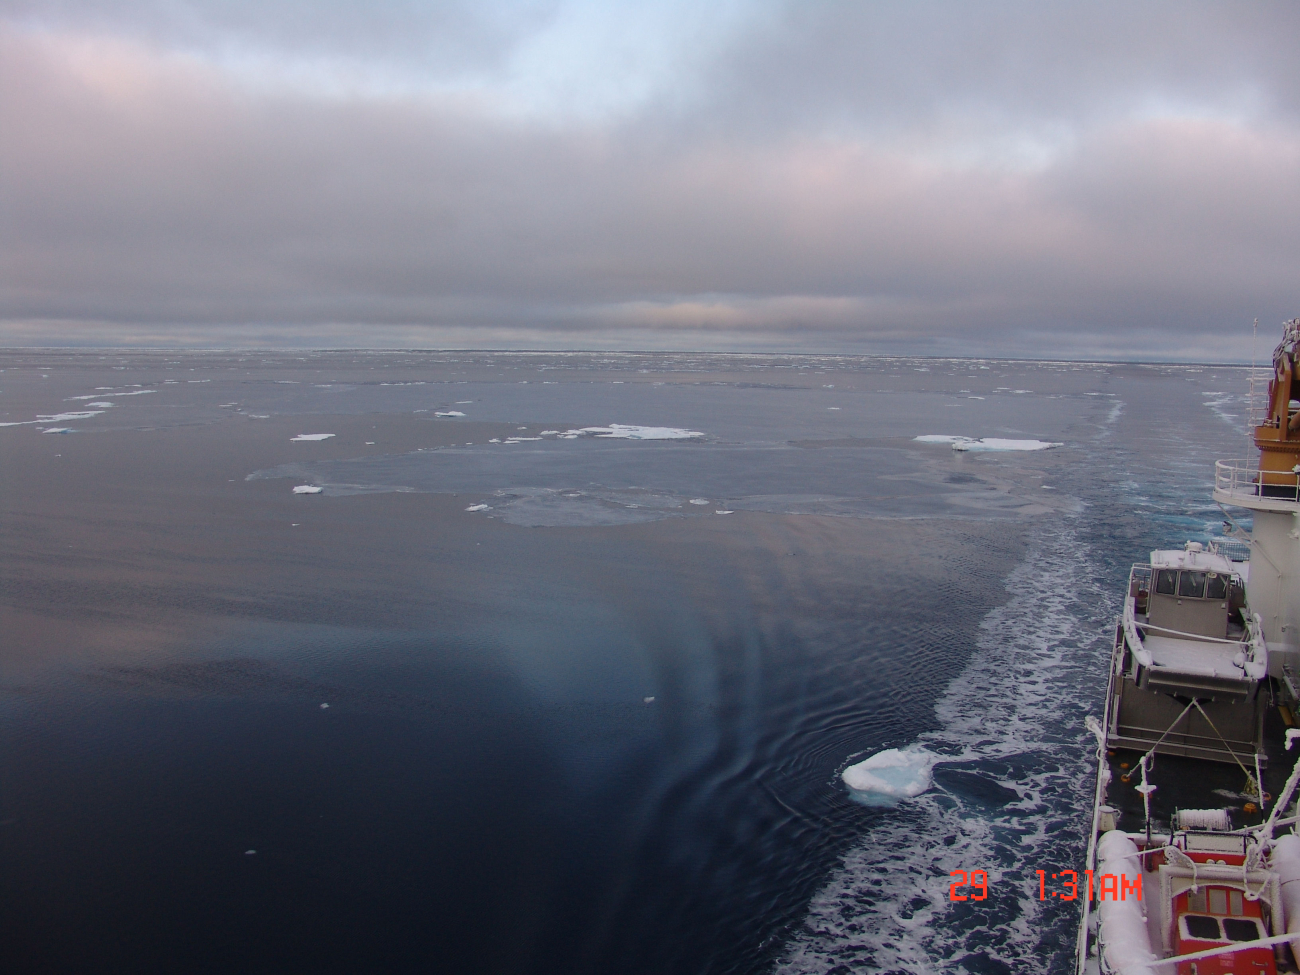 The CGC HEALY proceeding through grease ice with some small floes in thearea